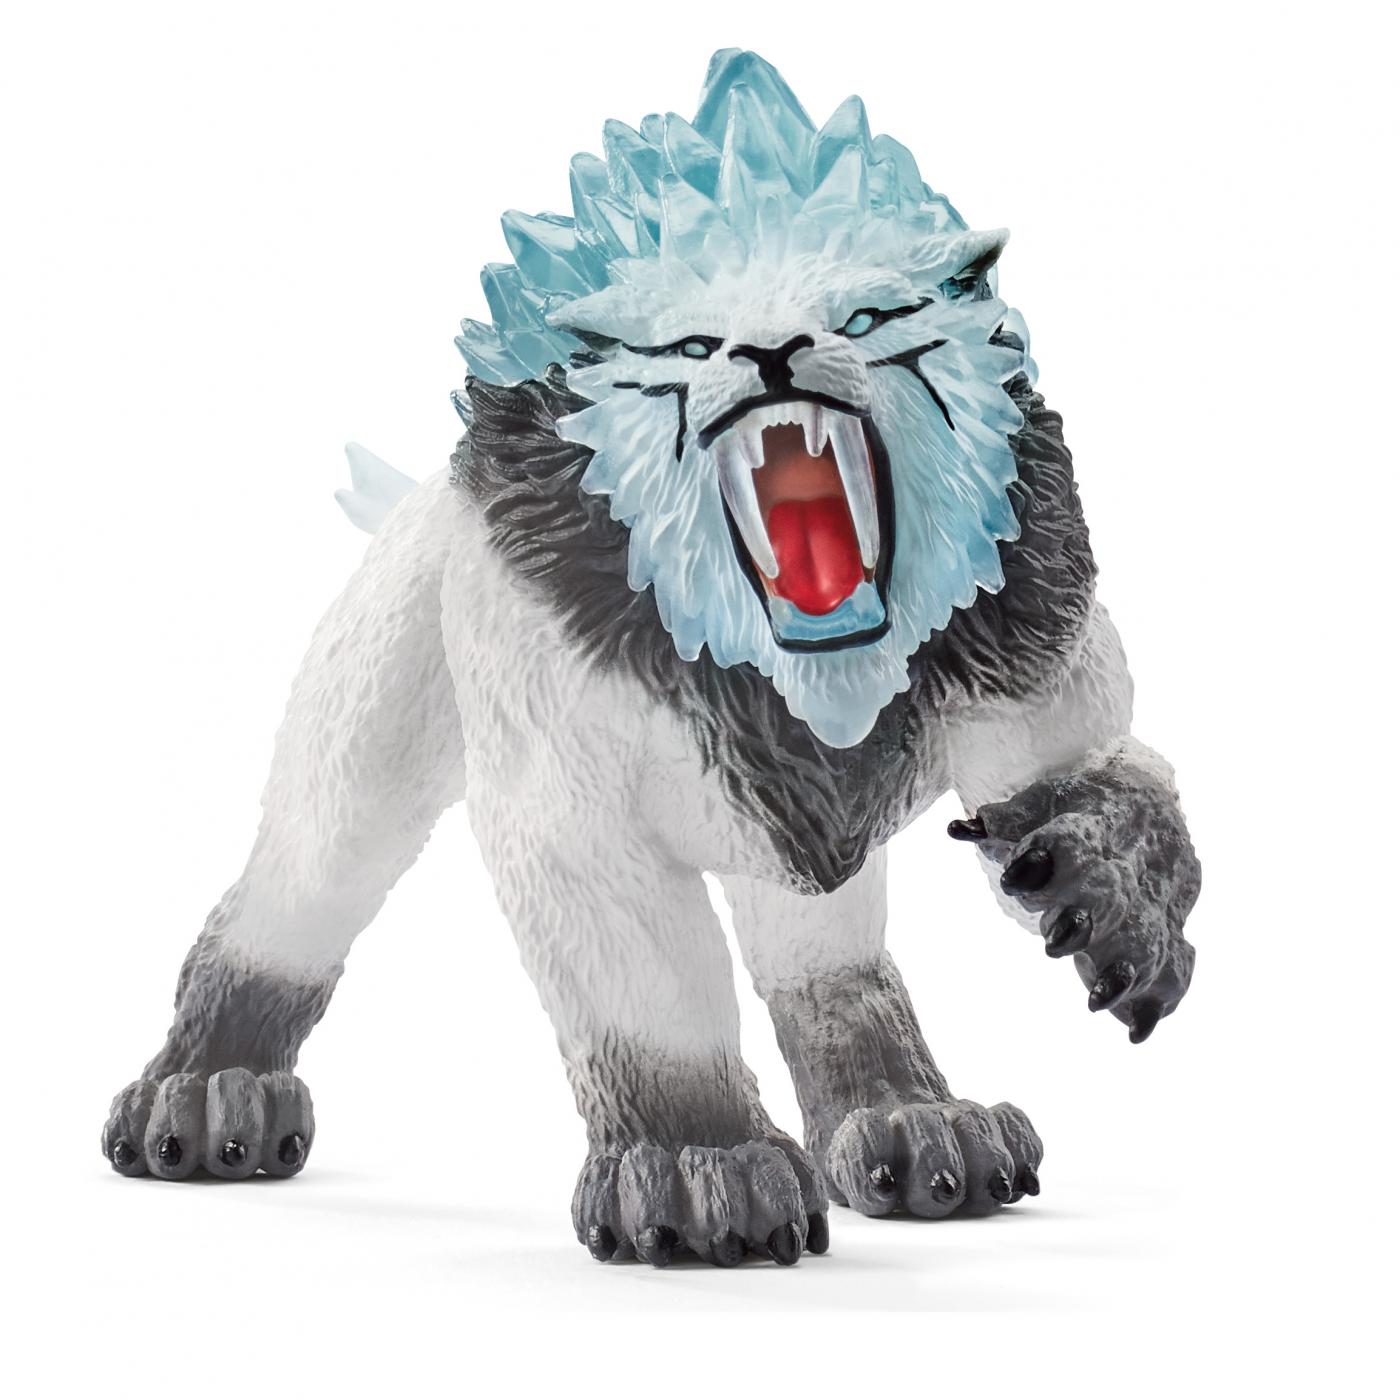 Schleich 42497 Attack on Ice Fortress